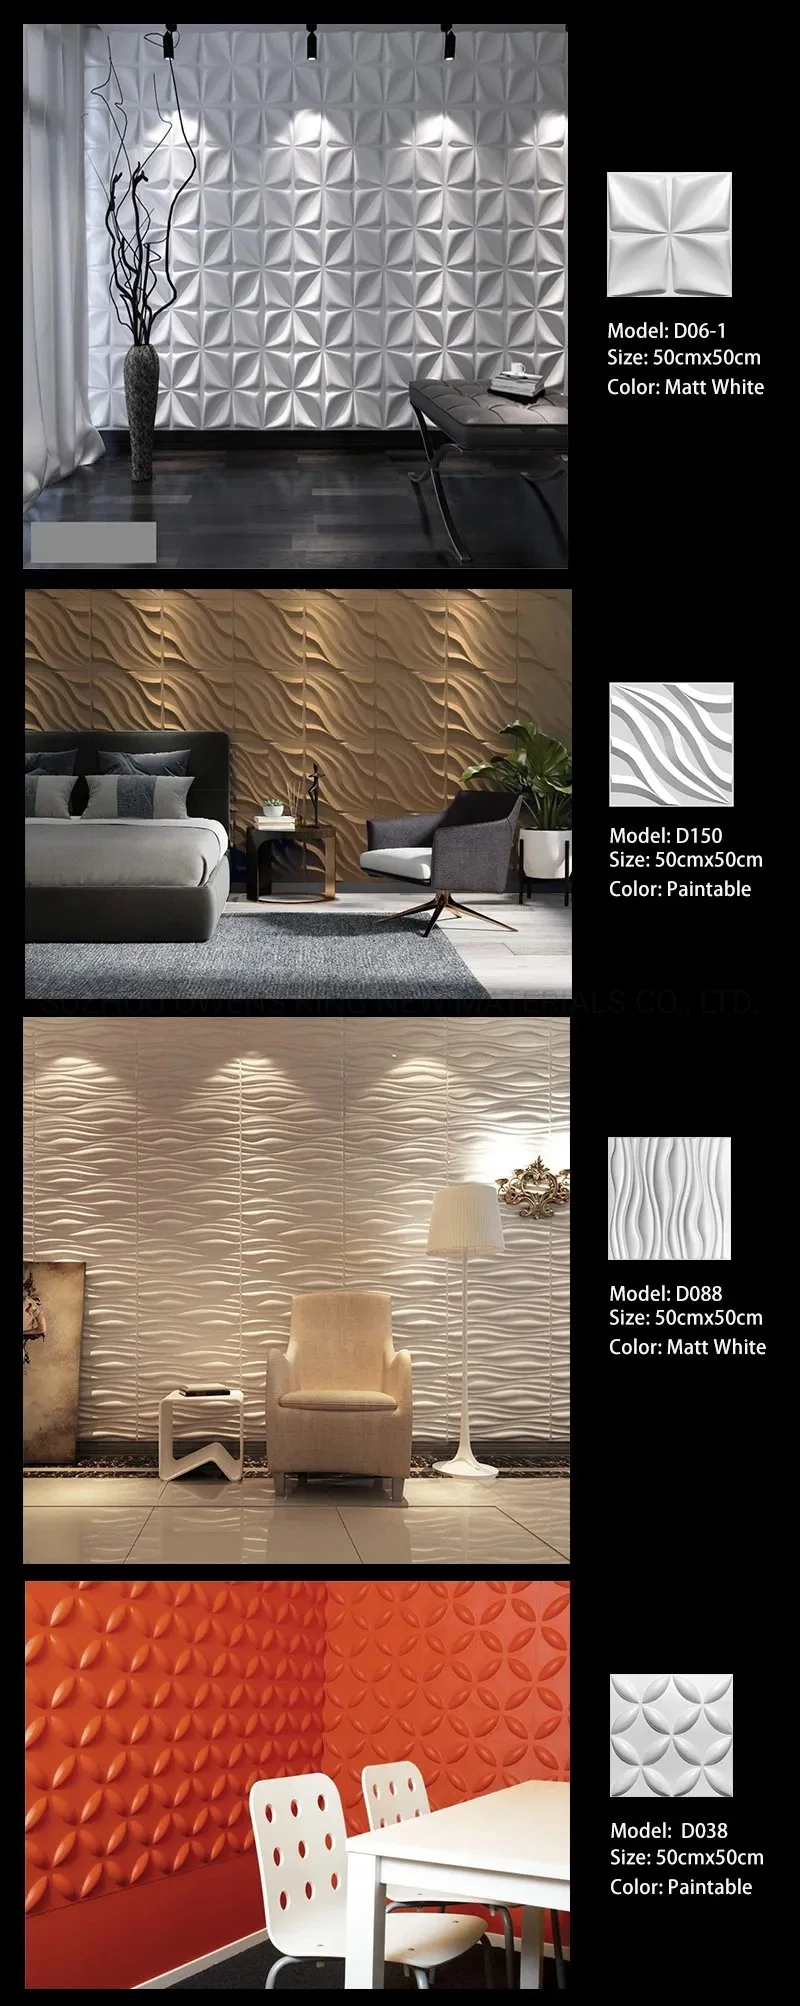 Wholesale Price Waterproof Paintable 3D PVC Wall Panels for Walls Decorative